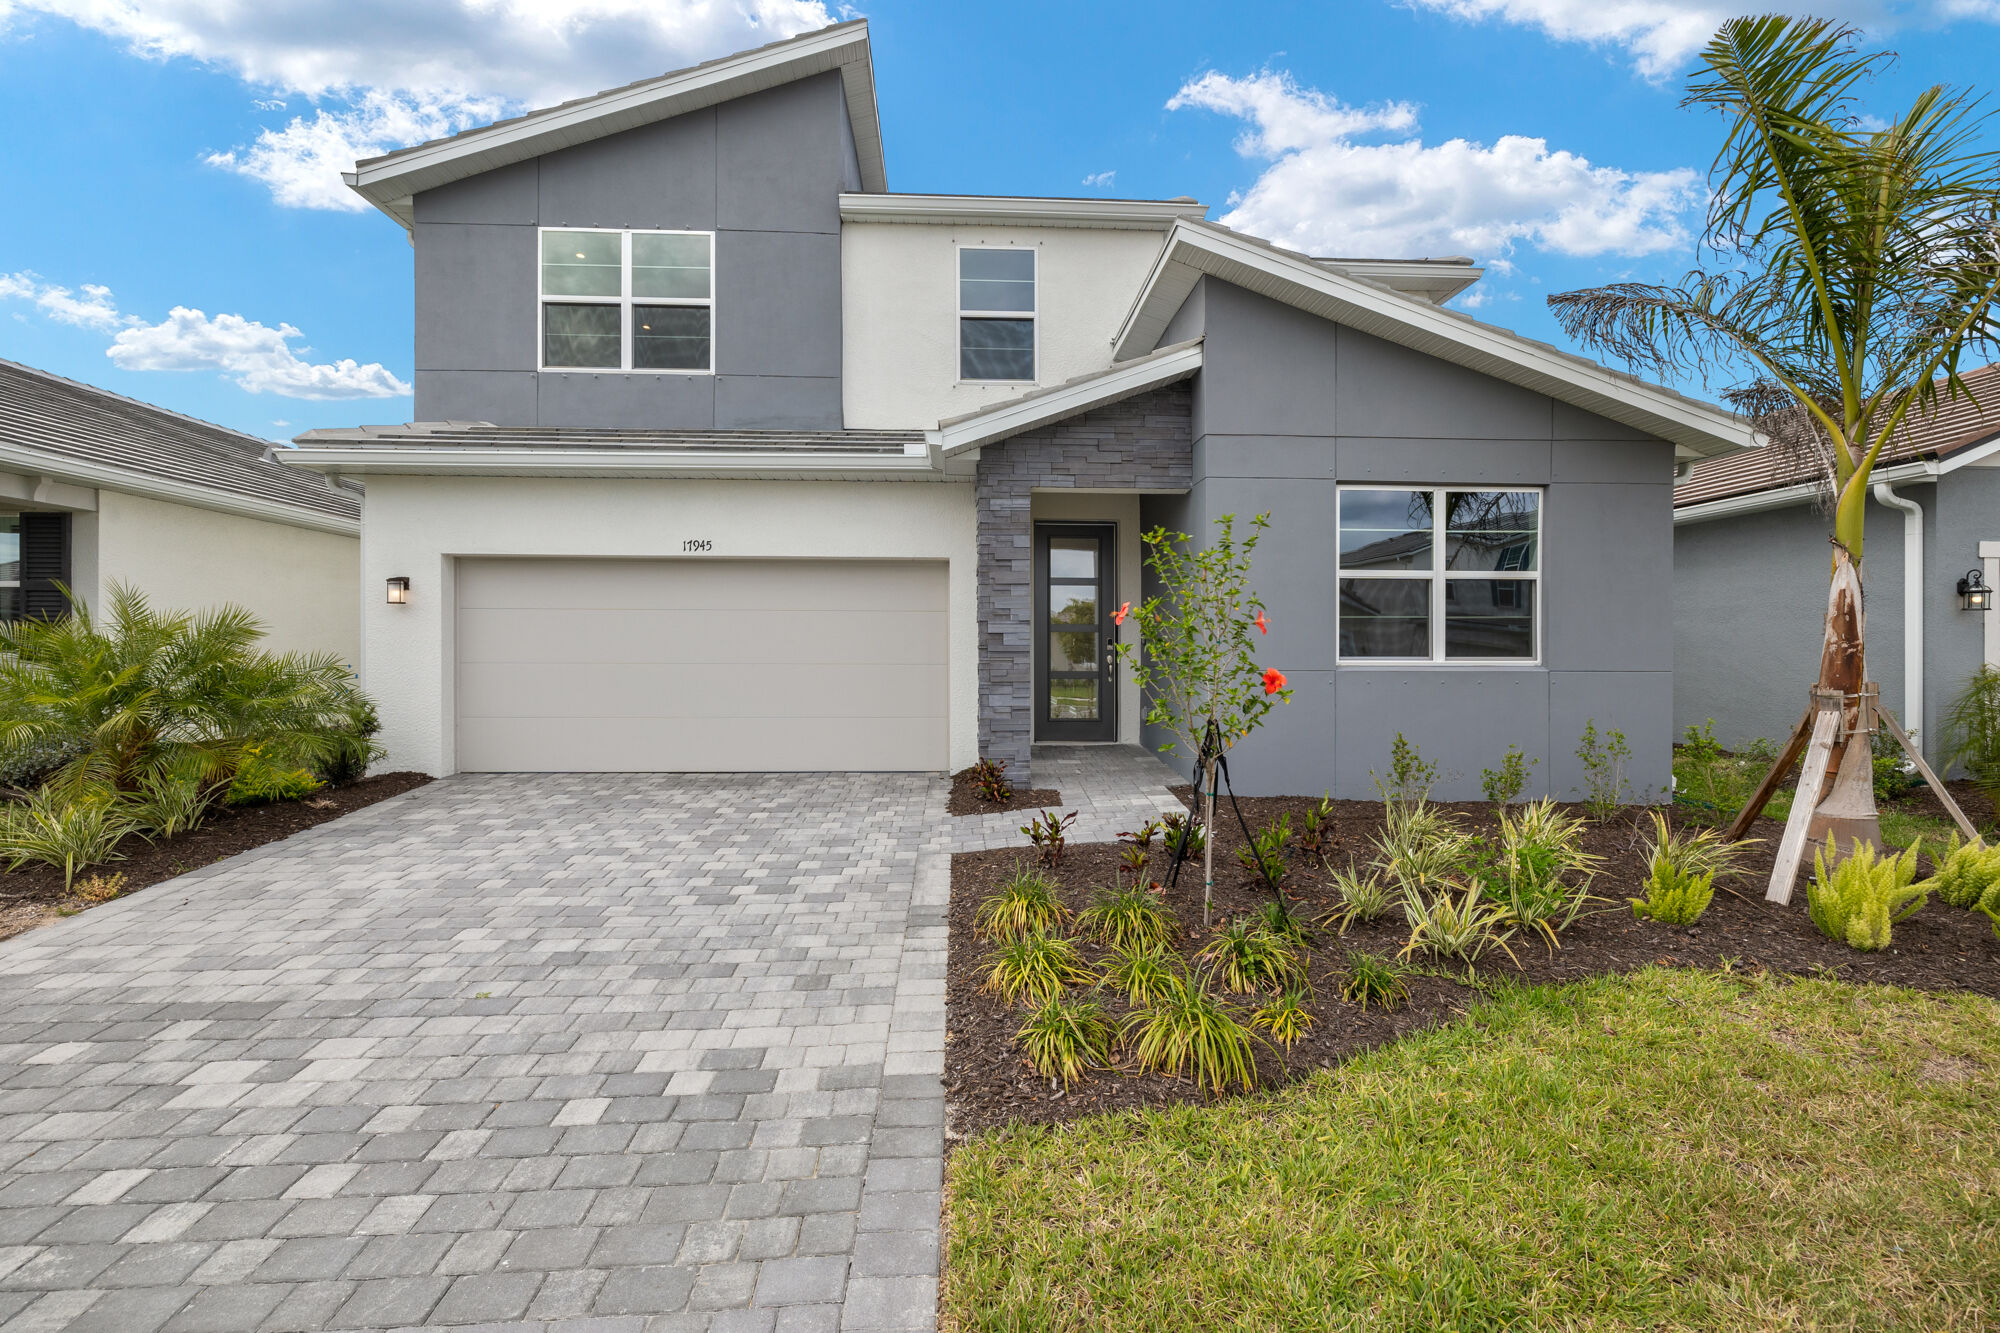 5 bedrooms, 3 baths, two story, extended lanai, executive kitchen, butlers pantry, study, bed and bath on main floor, walk-in closets, island breakfast bar, luxury vinyl lank flooring Modern Exterior